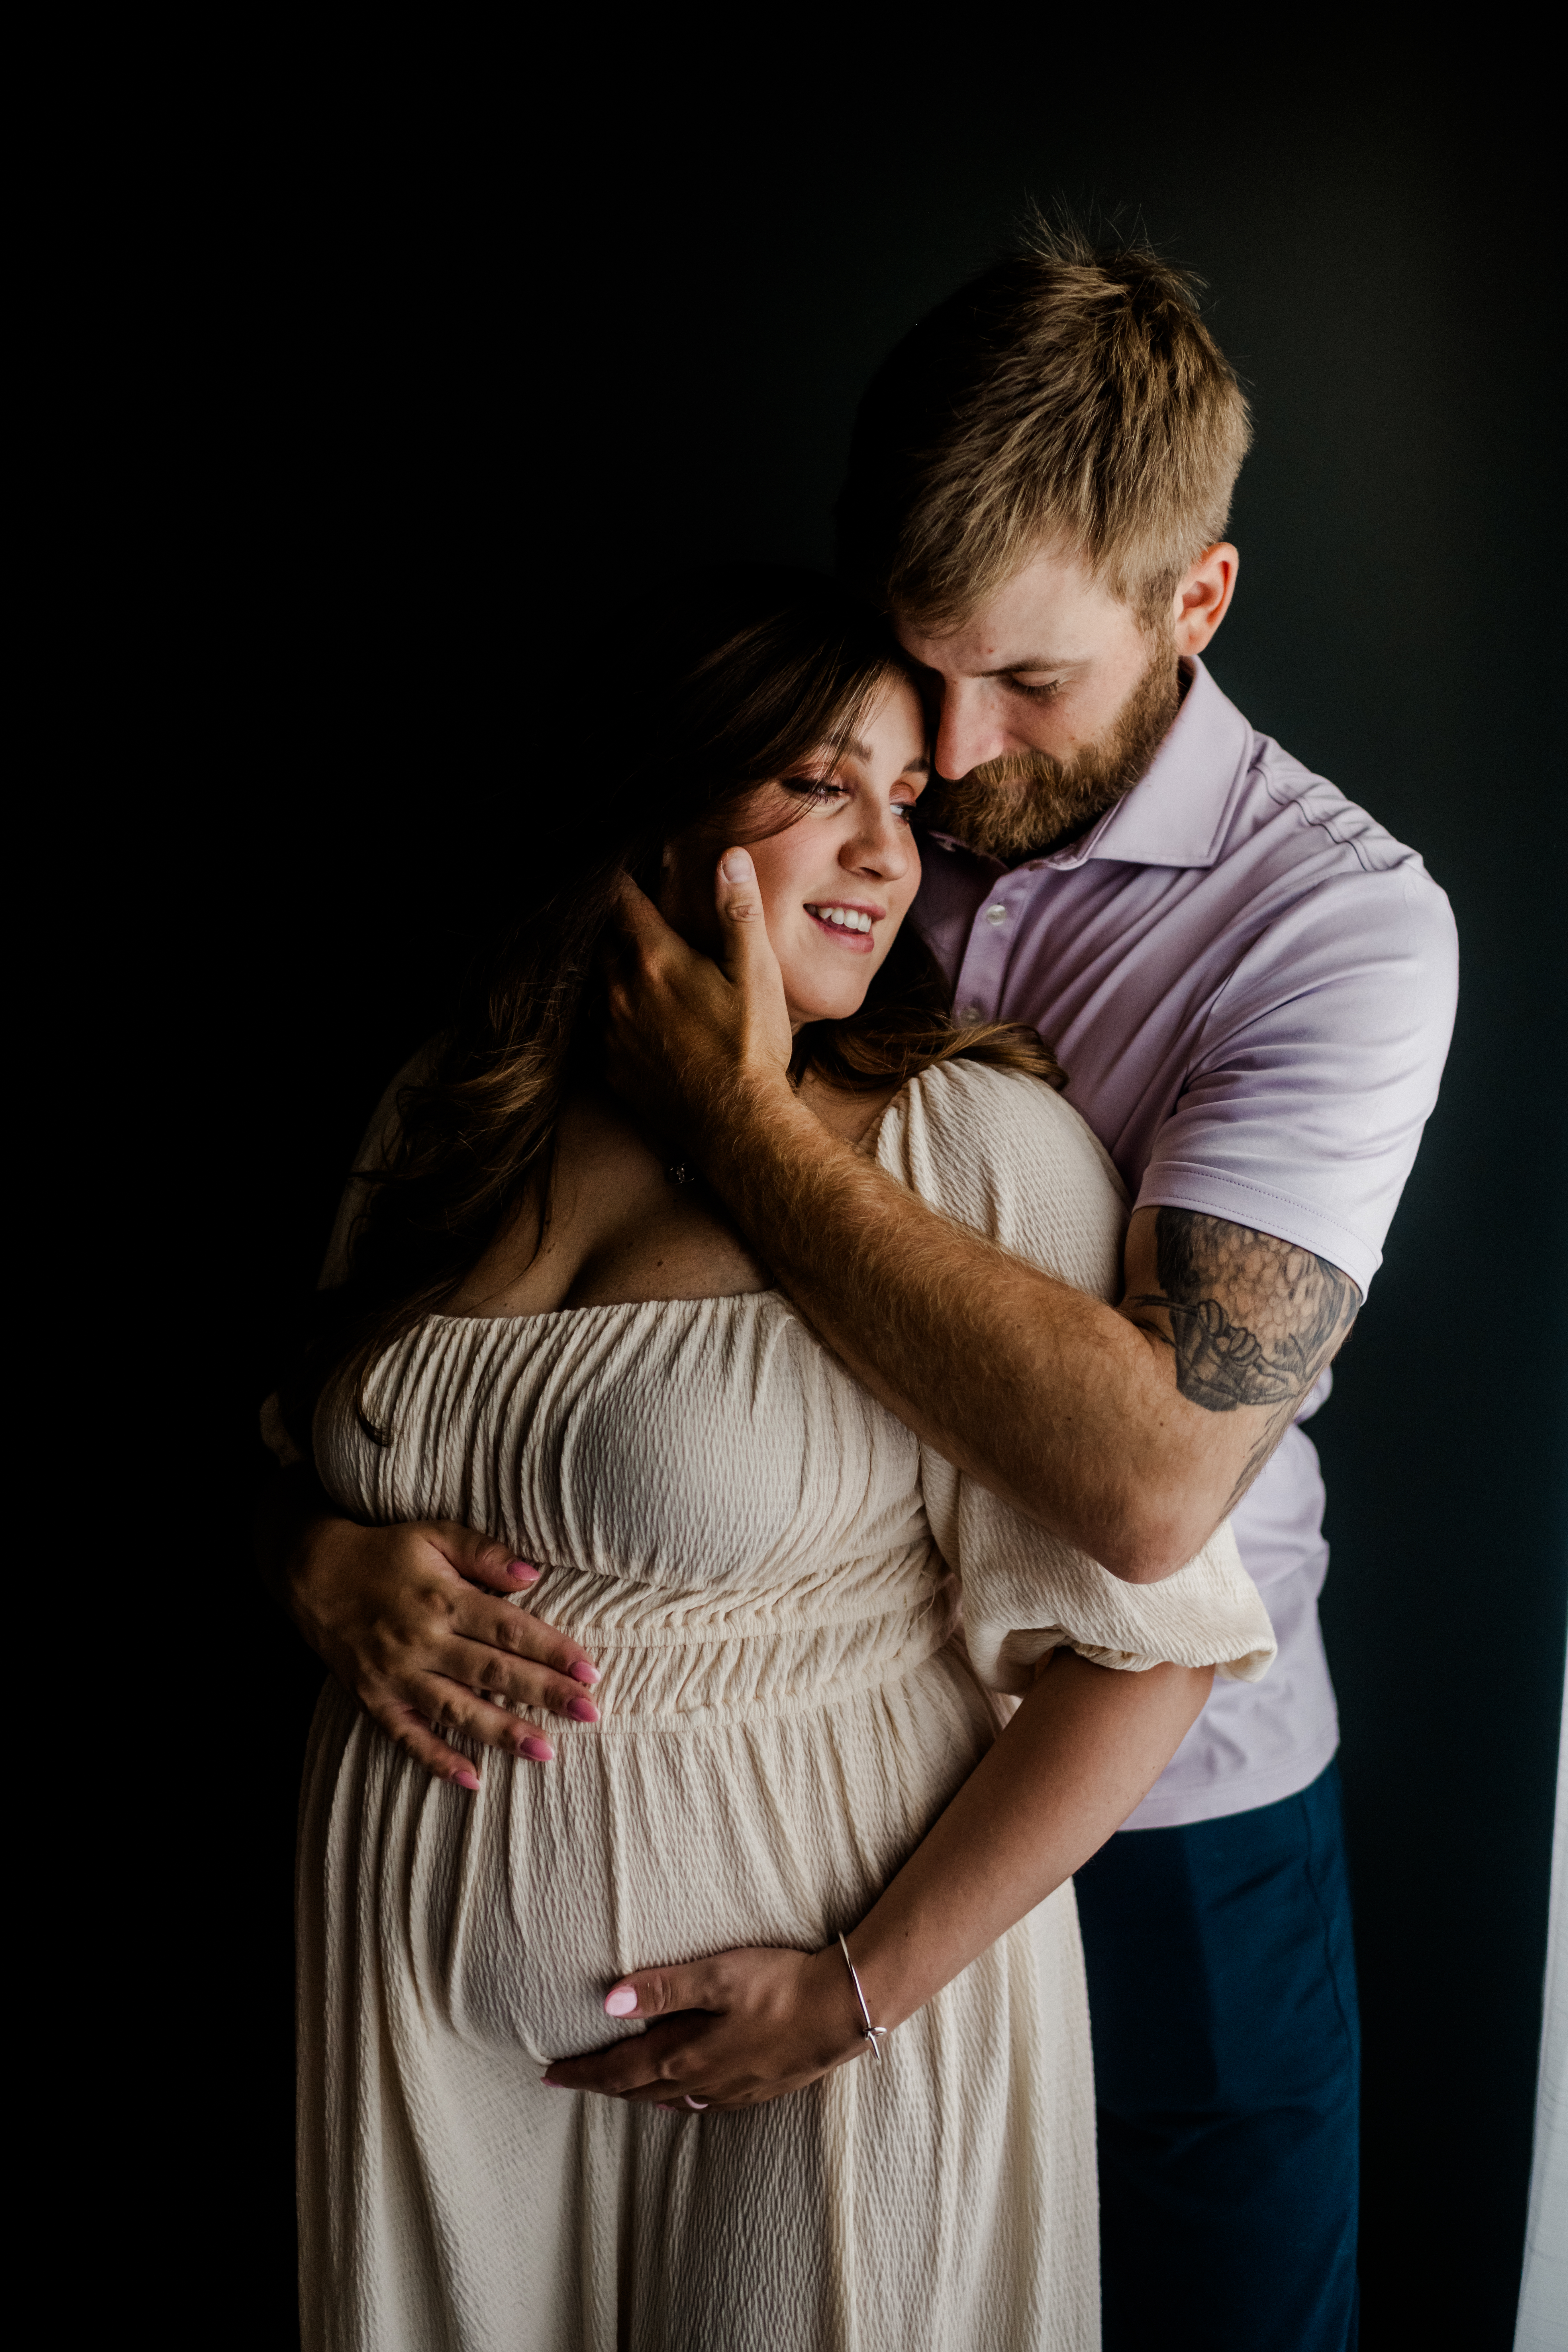 Stephanie and Andrew's Maternity Session in Bryan, Texas with Rachel Driskell Photography